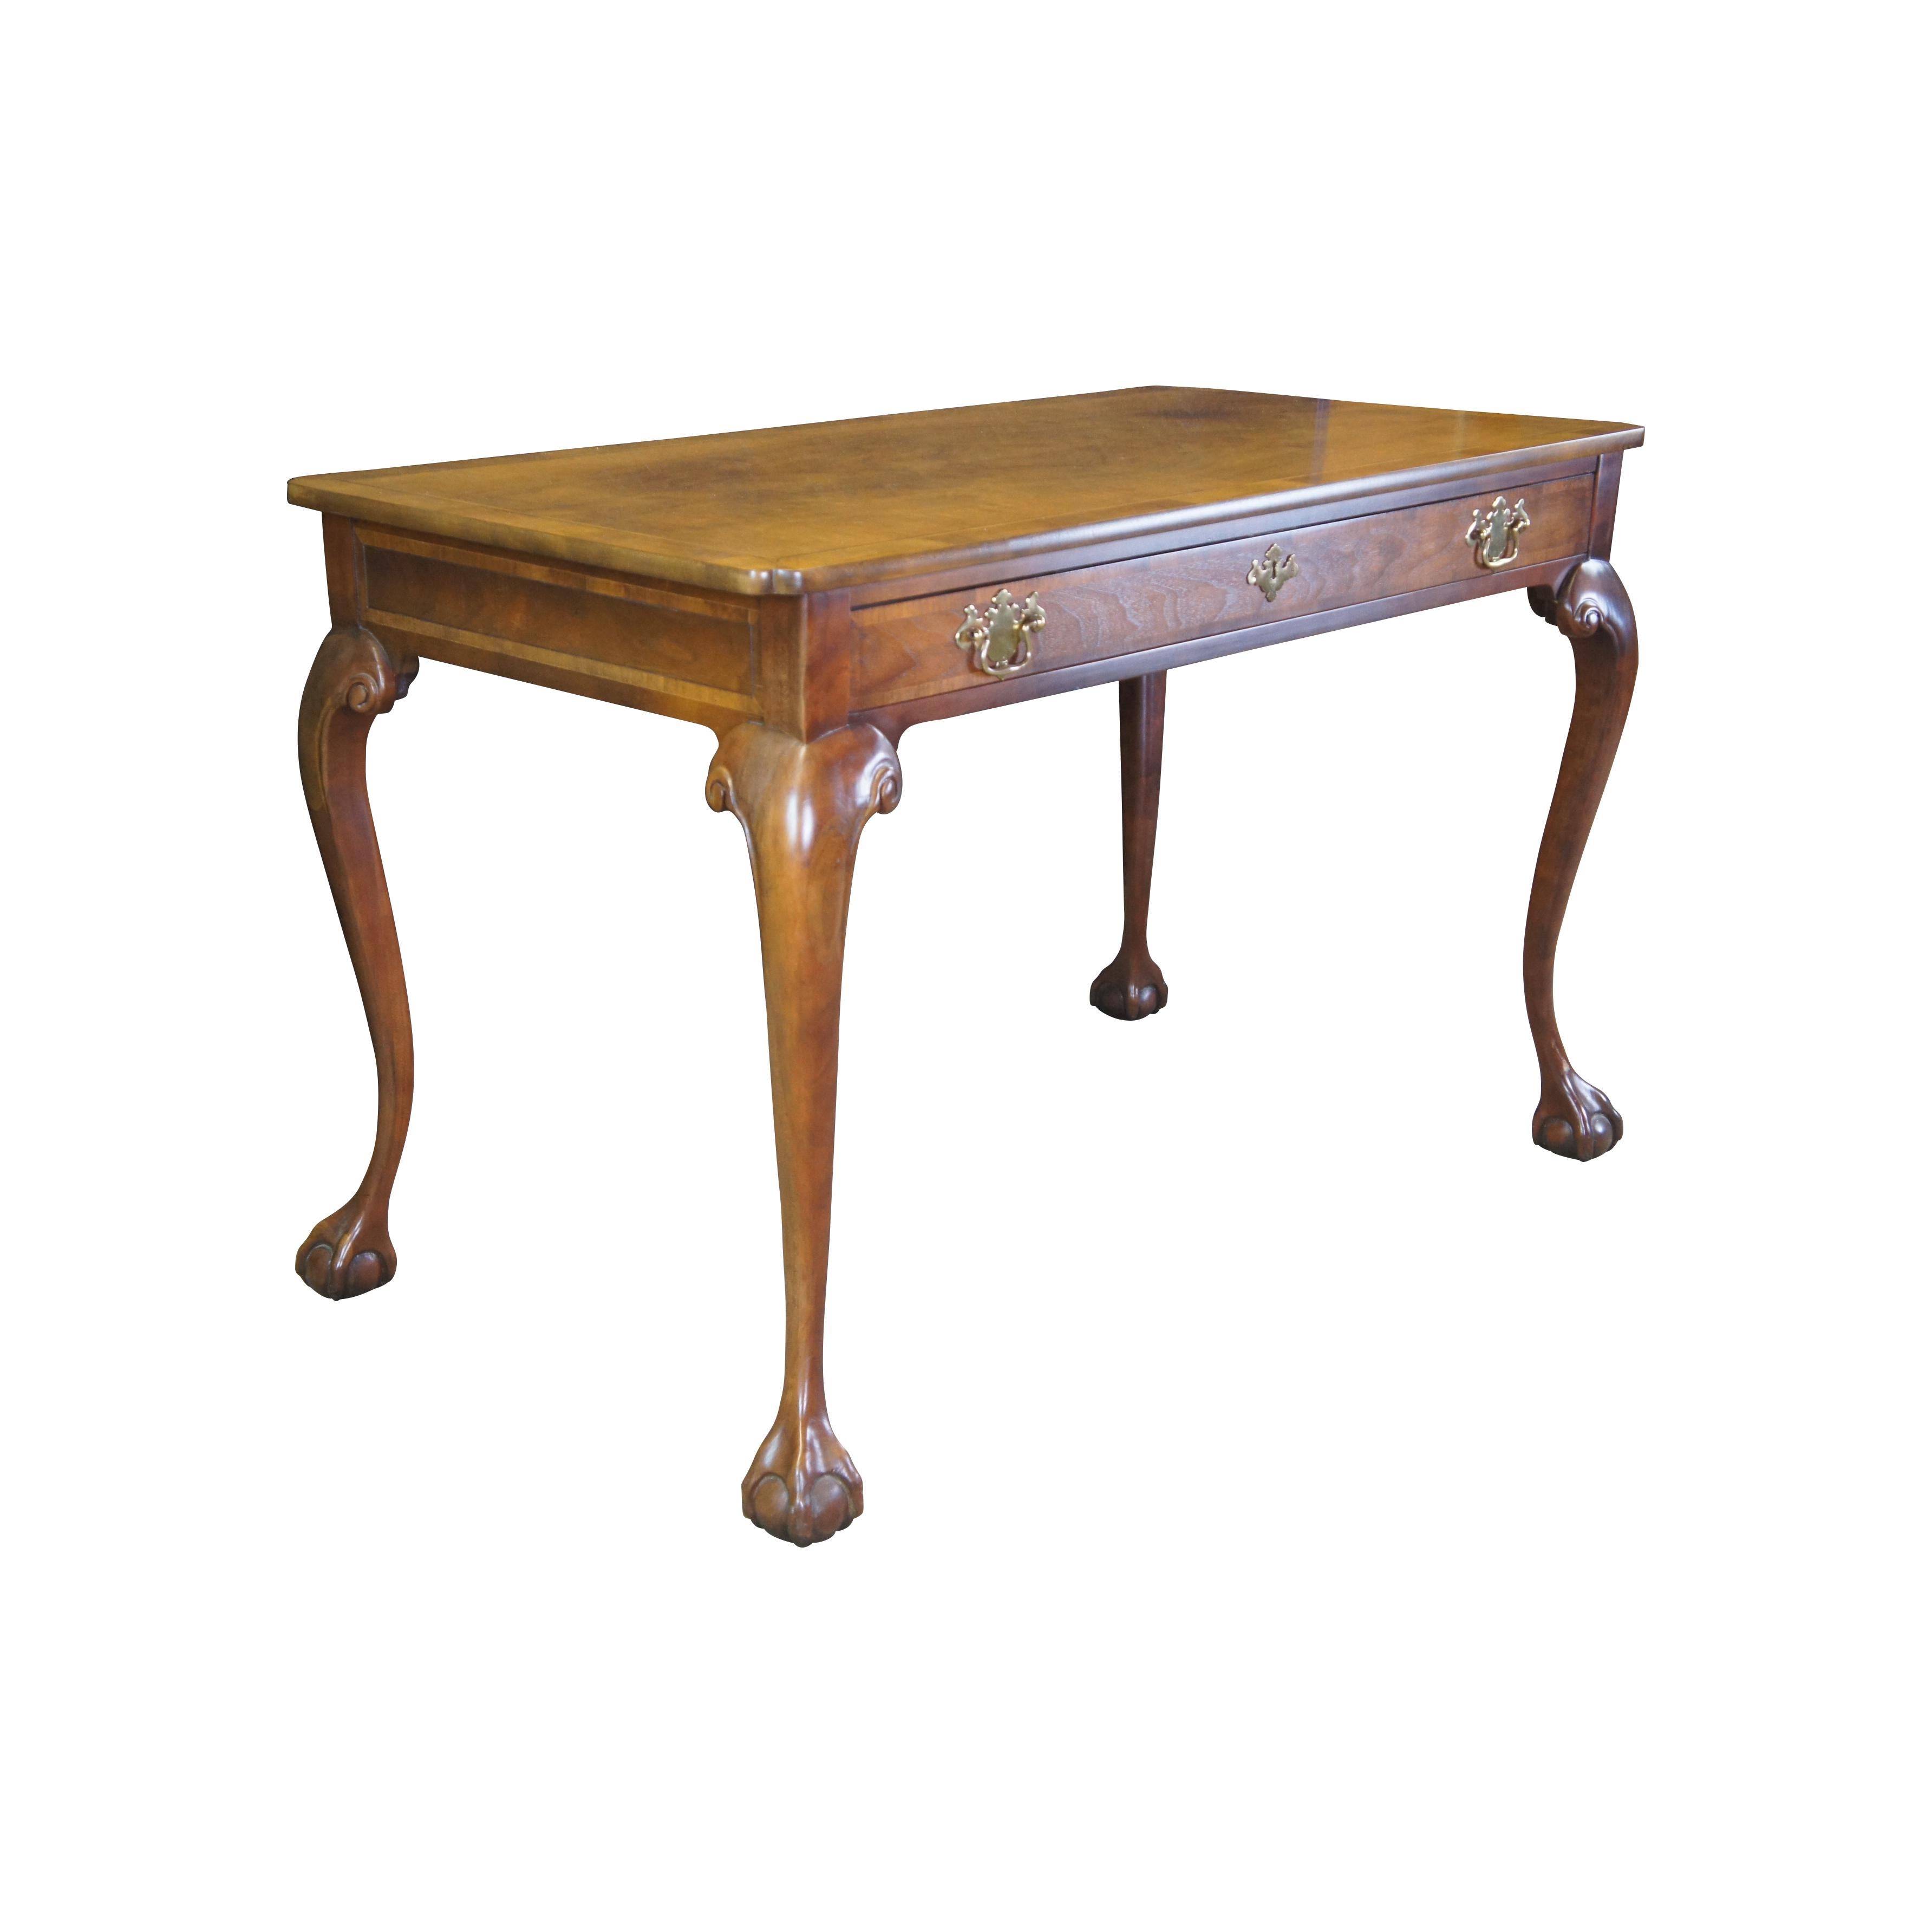 20th century Baker Stately Homes English Georgian Chippendale Style Writing Desk. A rectangular form made from walnut with a beautiful matchbook top. The desk features herringbone inlay throughout, a large dovetailed drawer with key and long